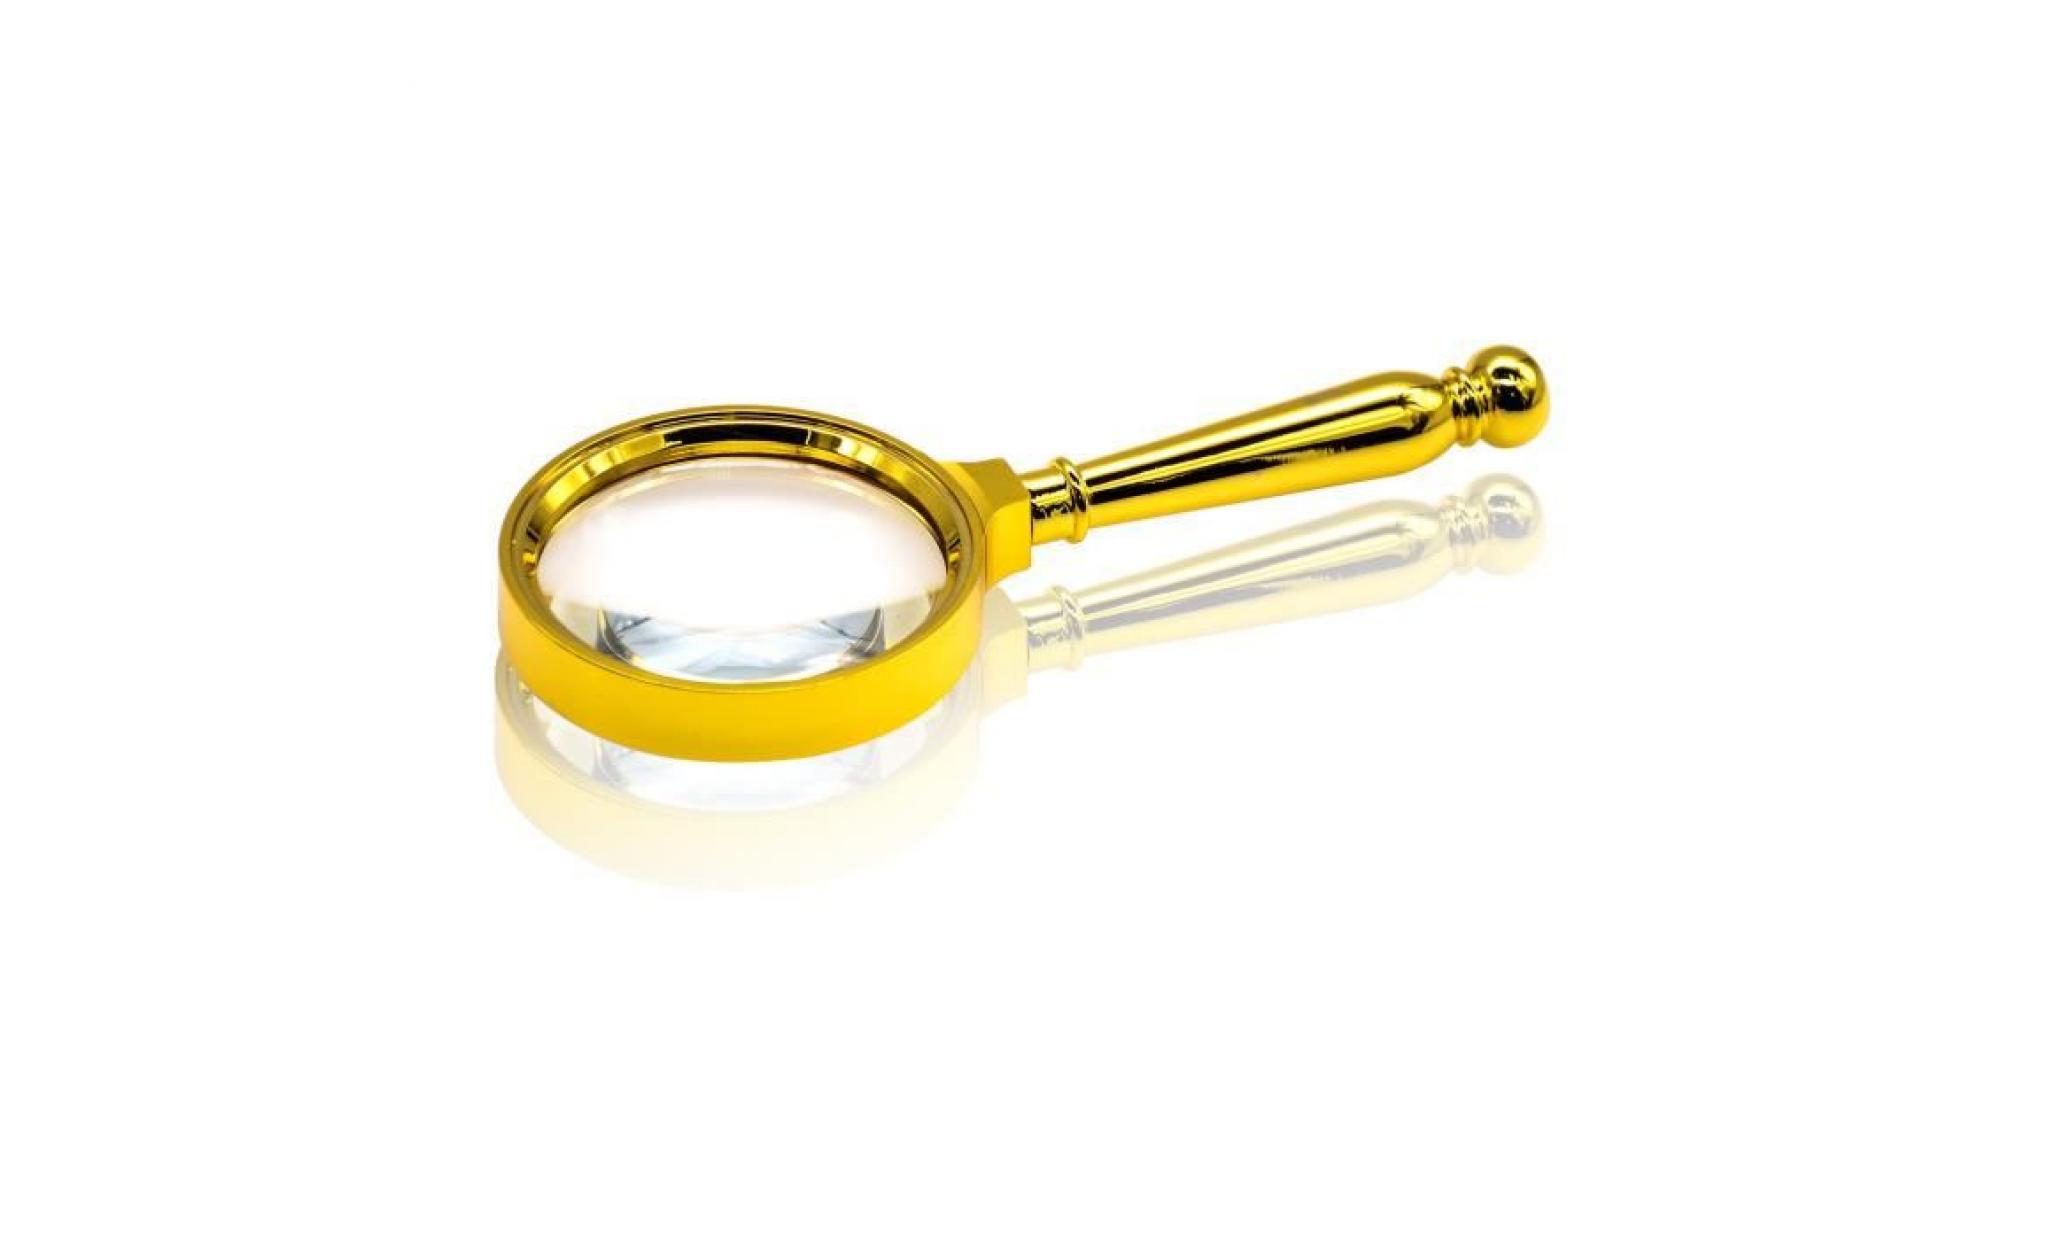 hand held classic magnifier glass 80 mm 10x magnification magnifying lens 2mubzu